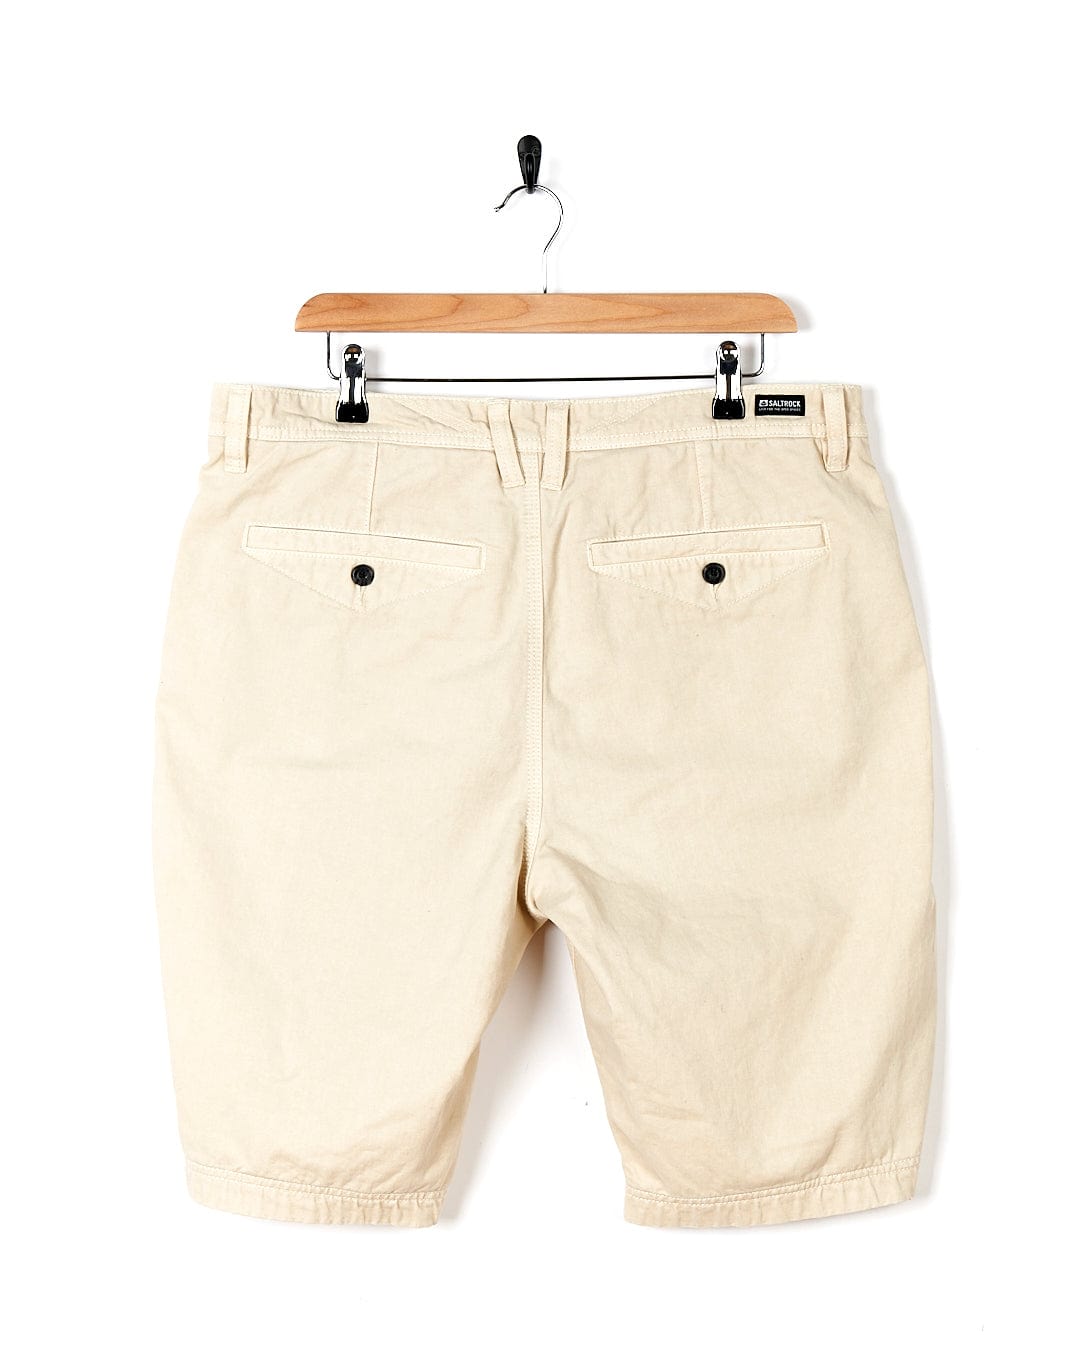 A pair of Sennen - Mens Chino Shorts - Natural by Saltrock hanging on a hanger.